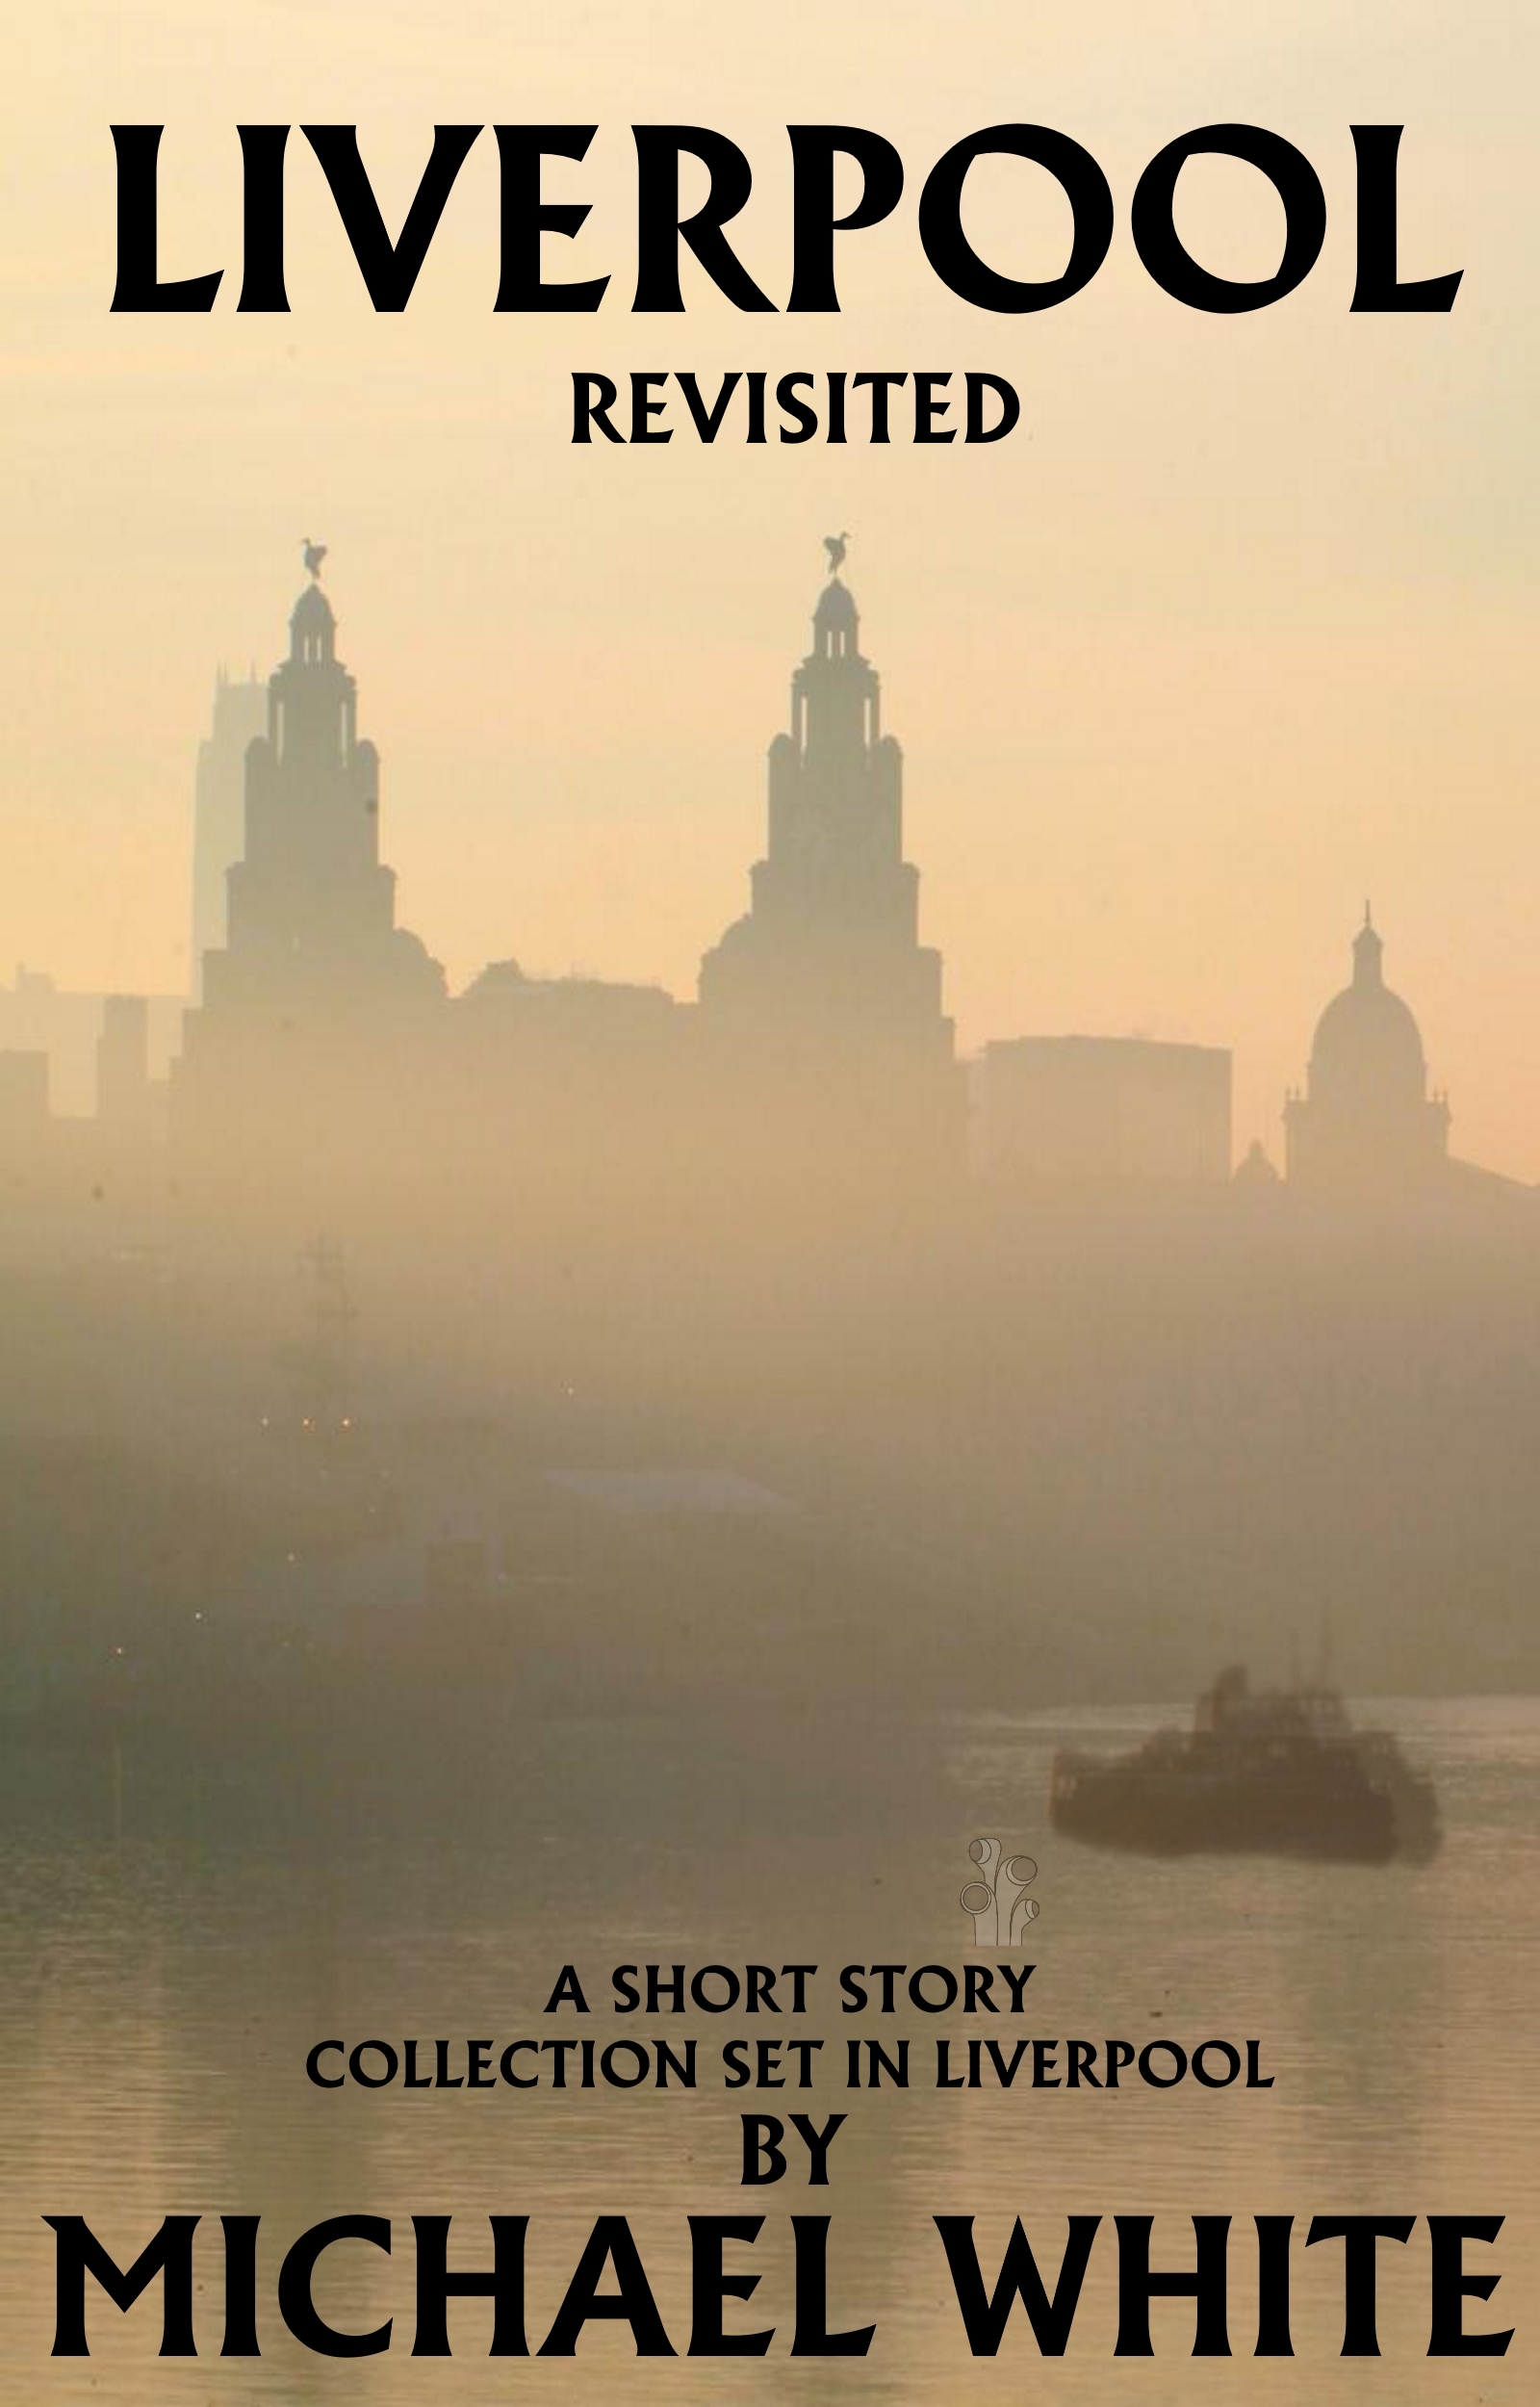 NEW LIVERPOOL COVER FINAL REVISITED